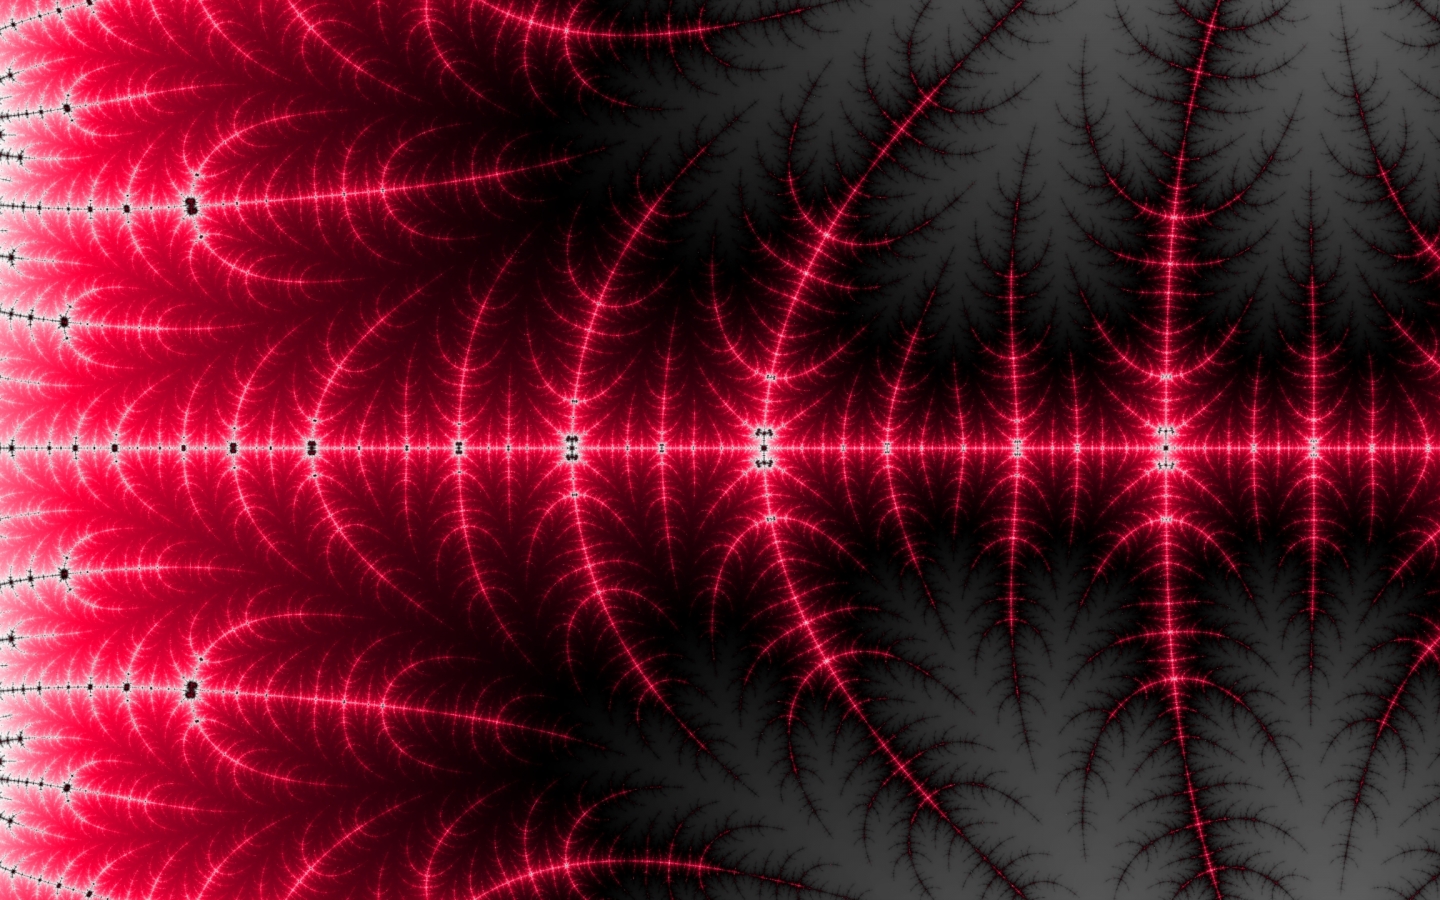 Trippy Desktop Background Set Any Of These Wallpaper On Your Screen